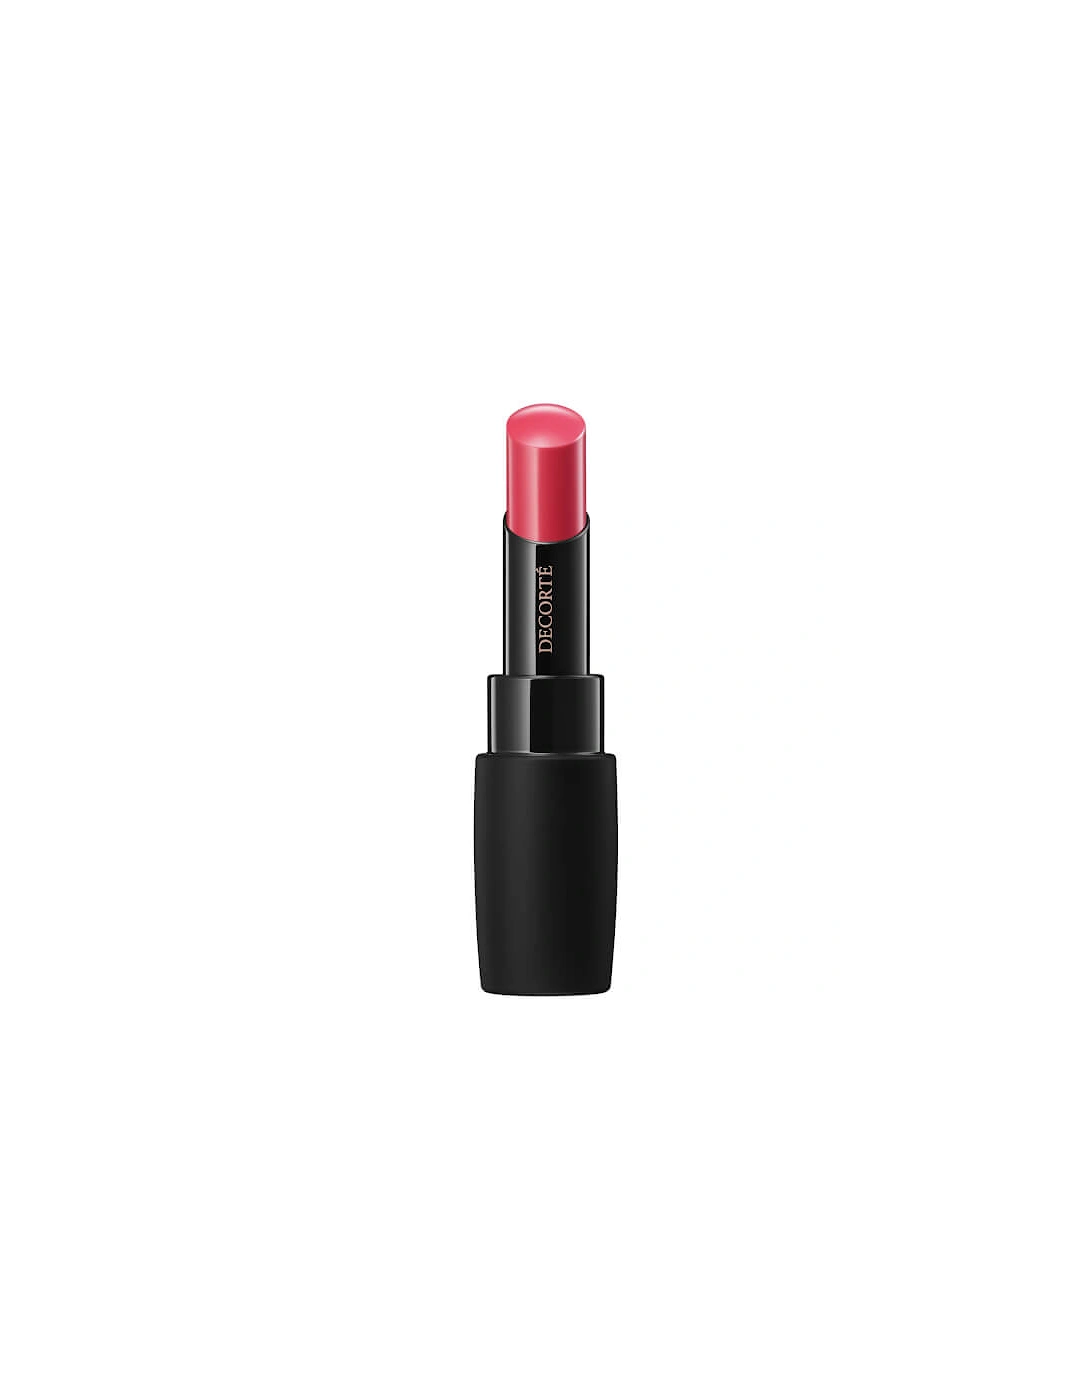 The Rouge High Gloss Lipstick - SP050